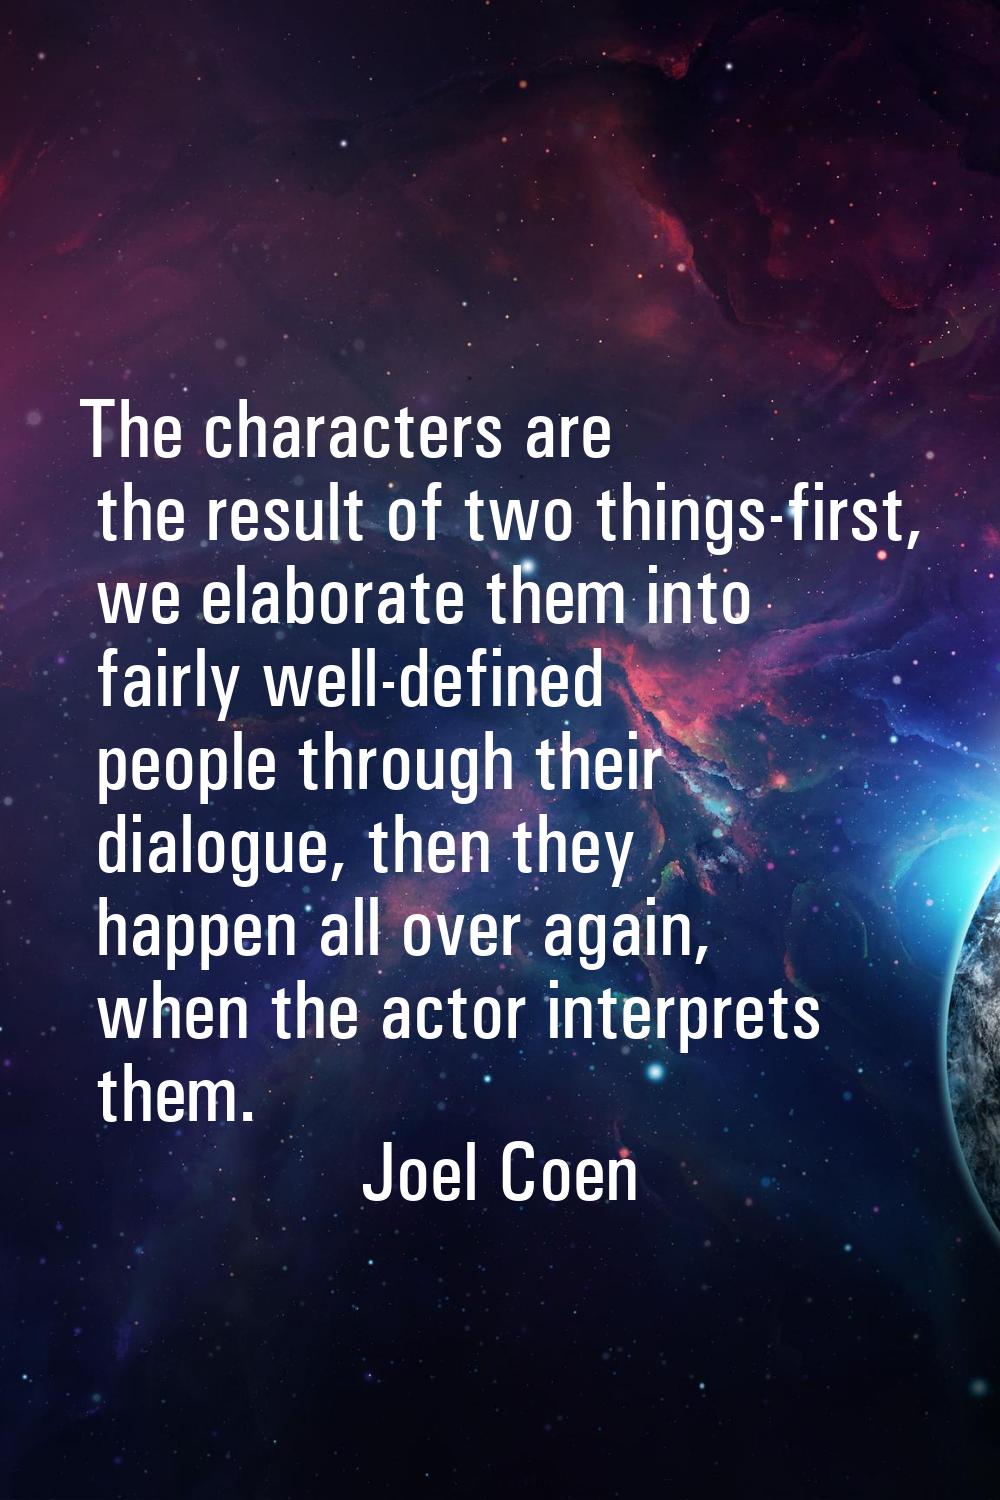 The characters are the result of two things-first, we elaborate them into fairly well-defined peopl